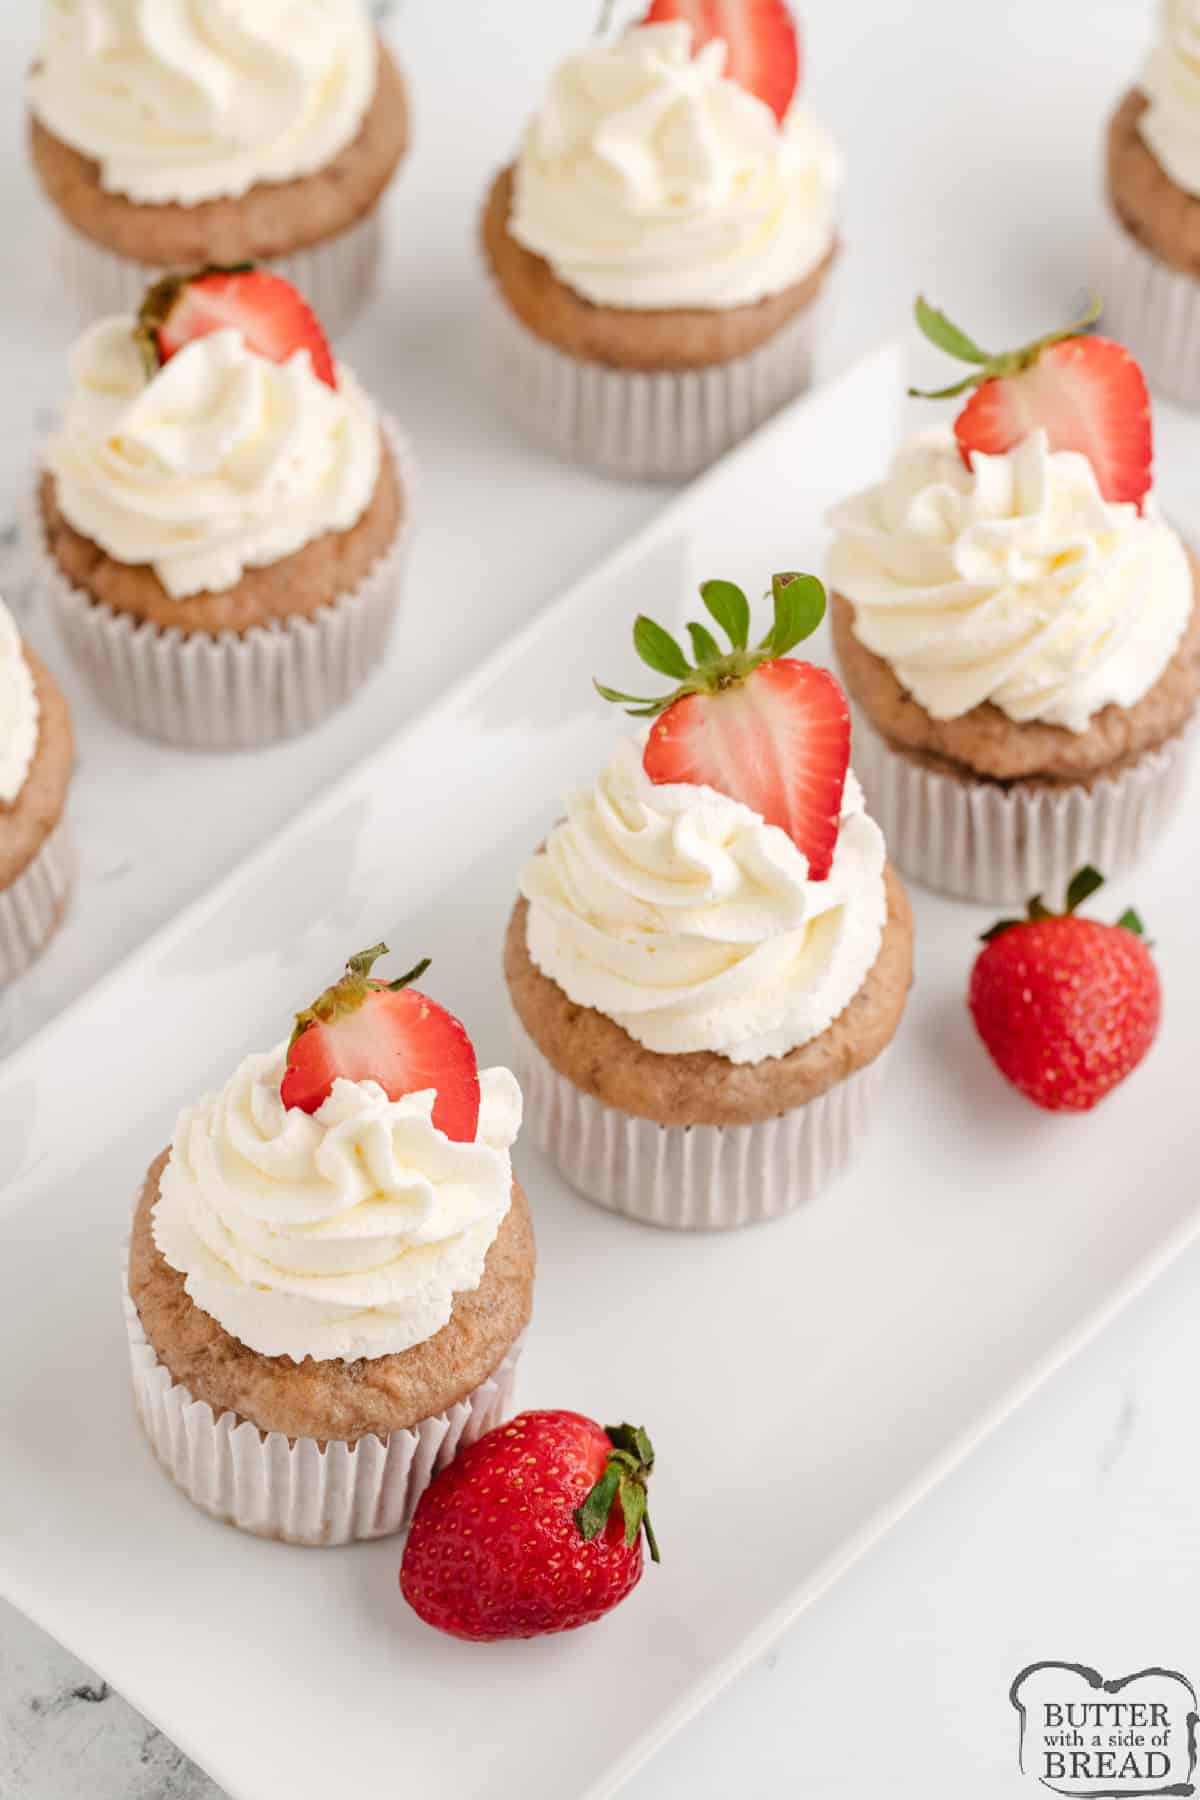 Cupcakes topped with whipped cream and strawberries. 